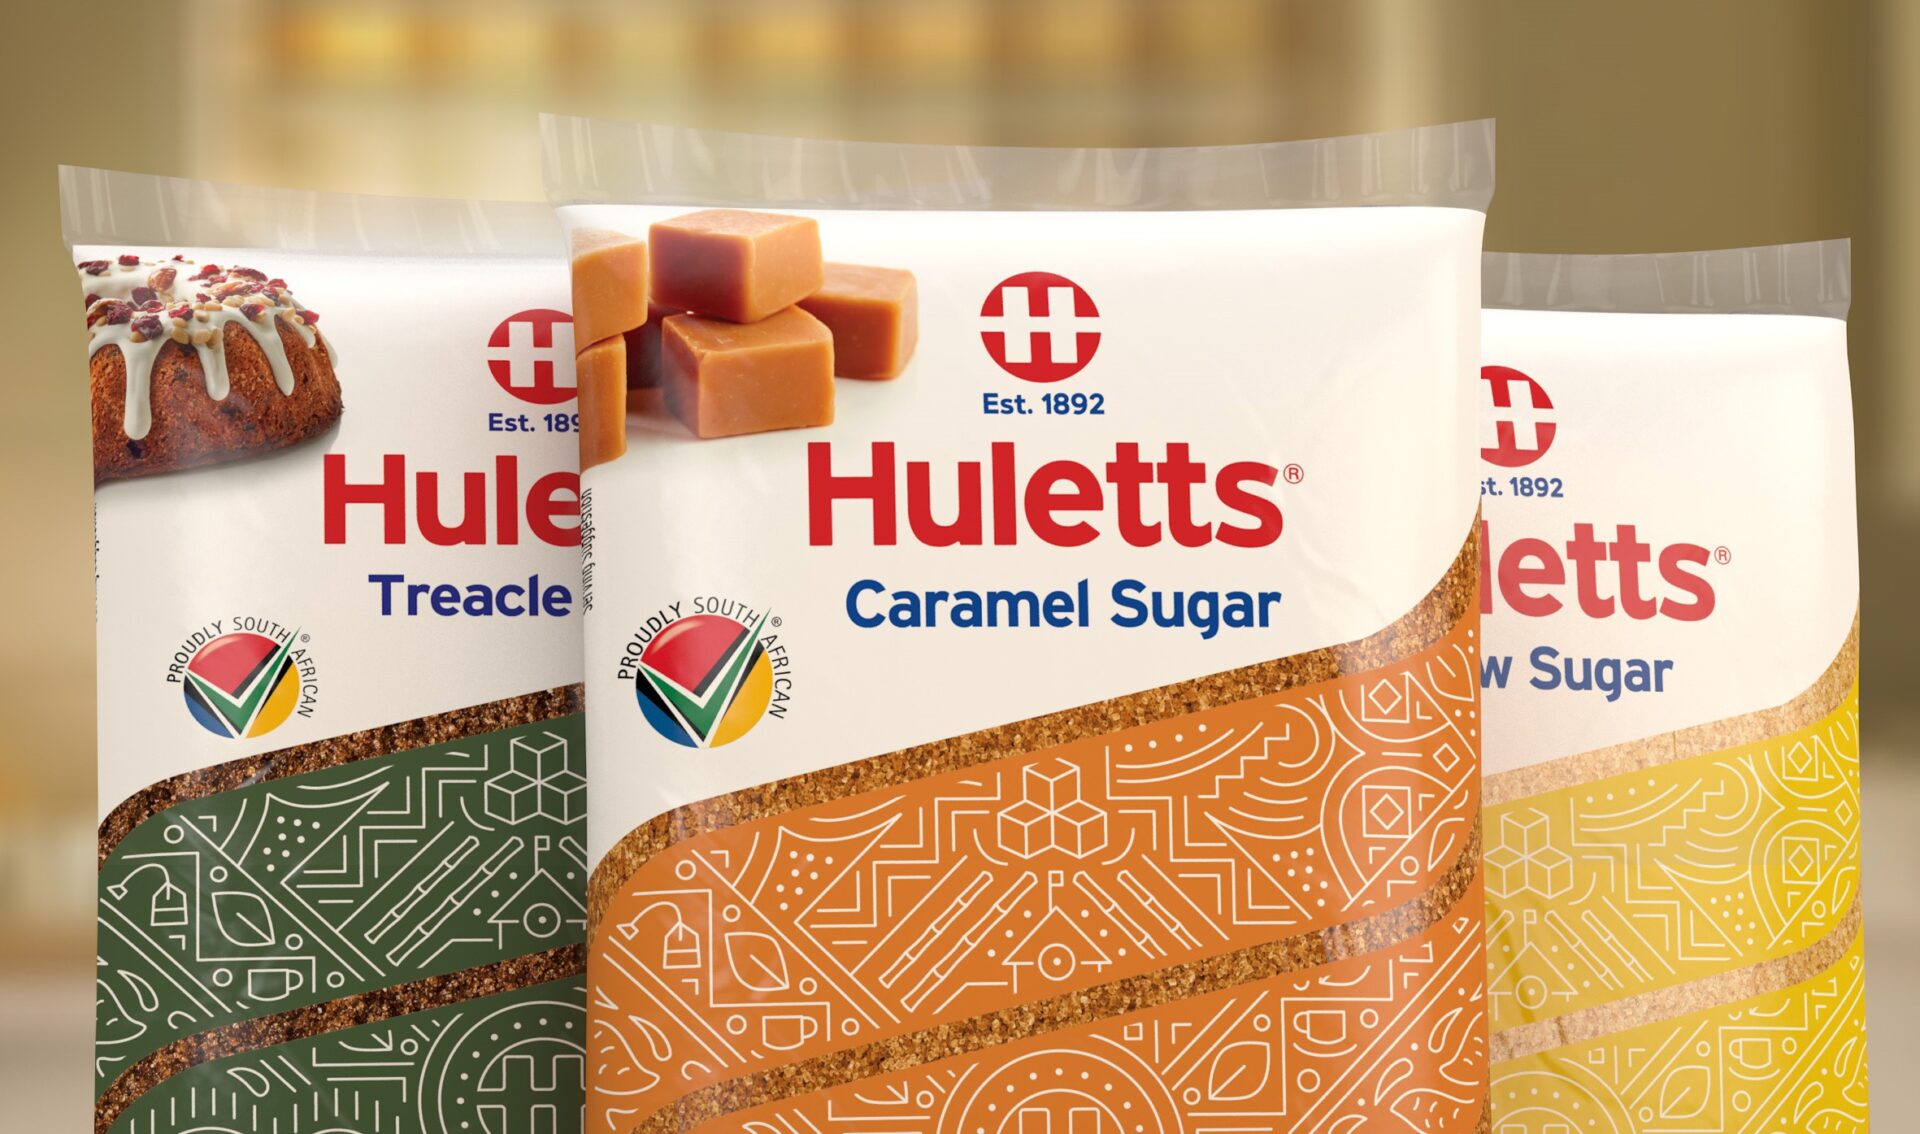 Hulletts Speciality Sugar packaging design